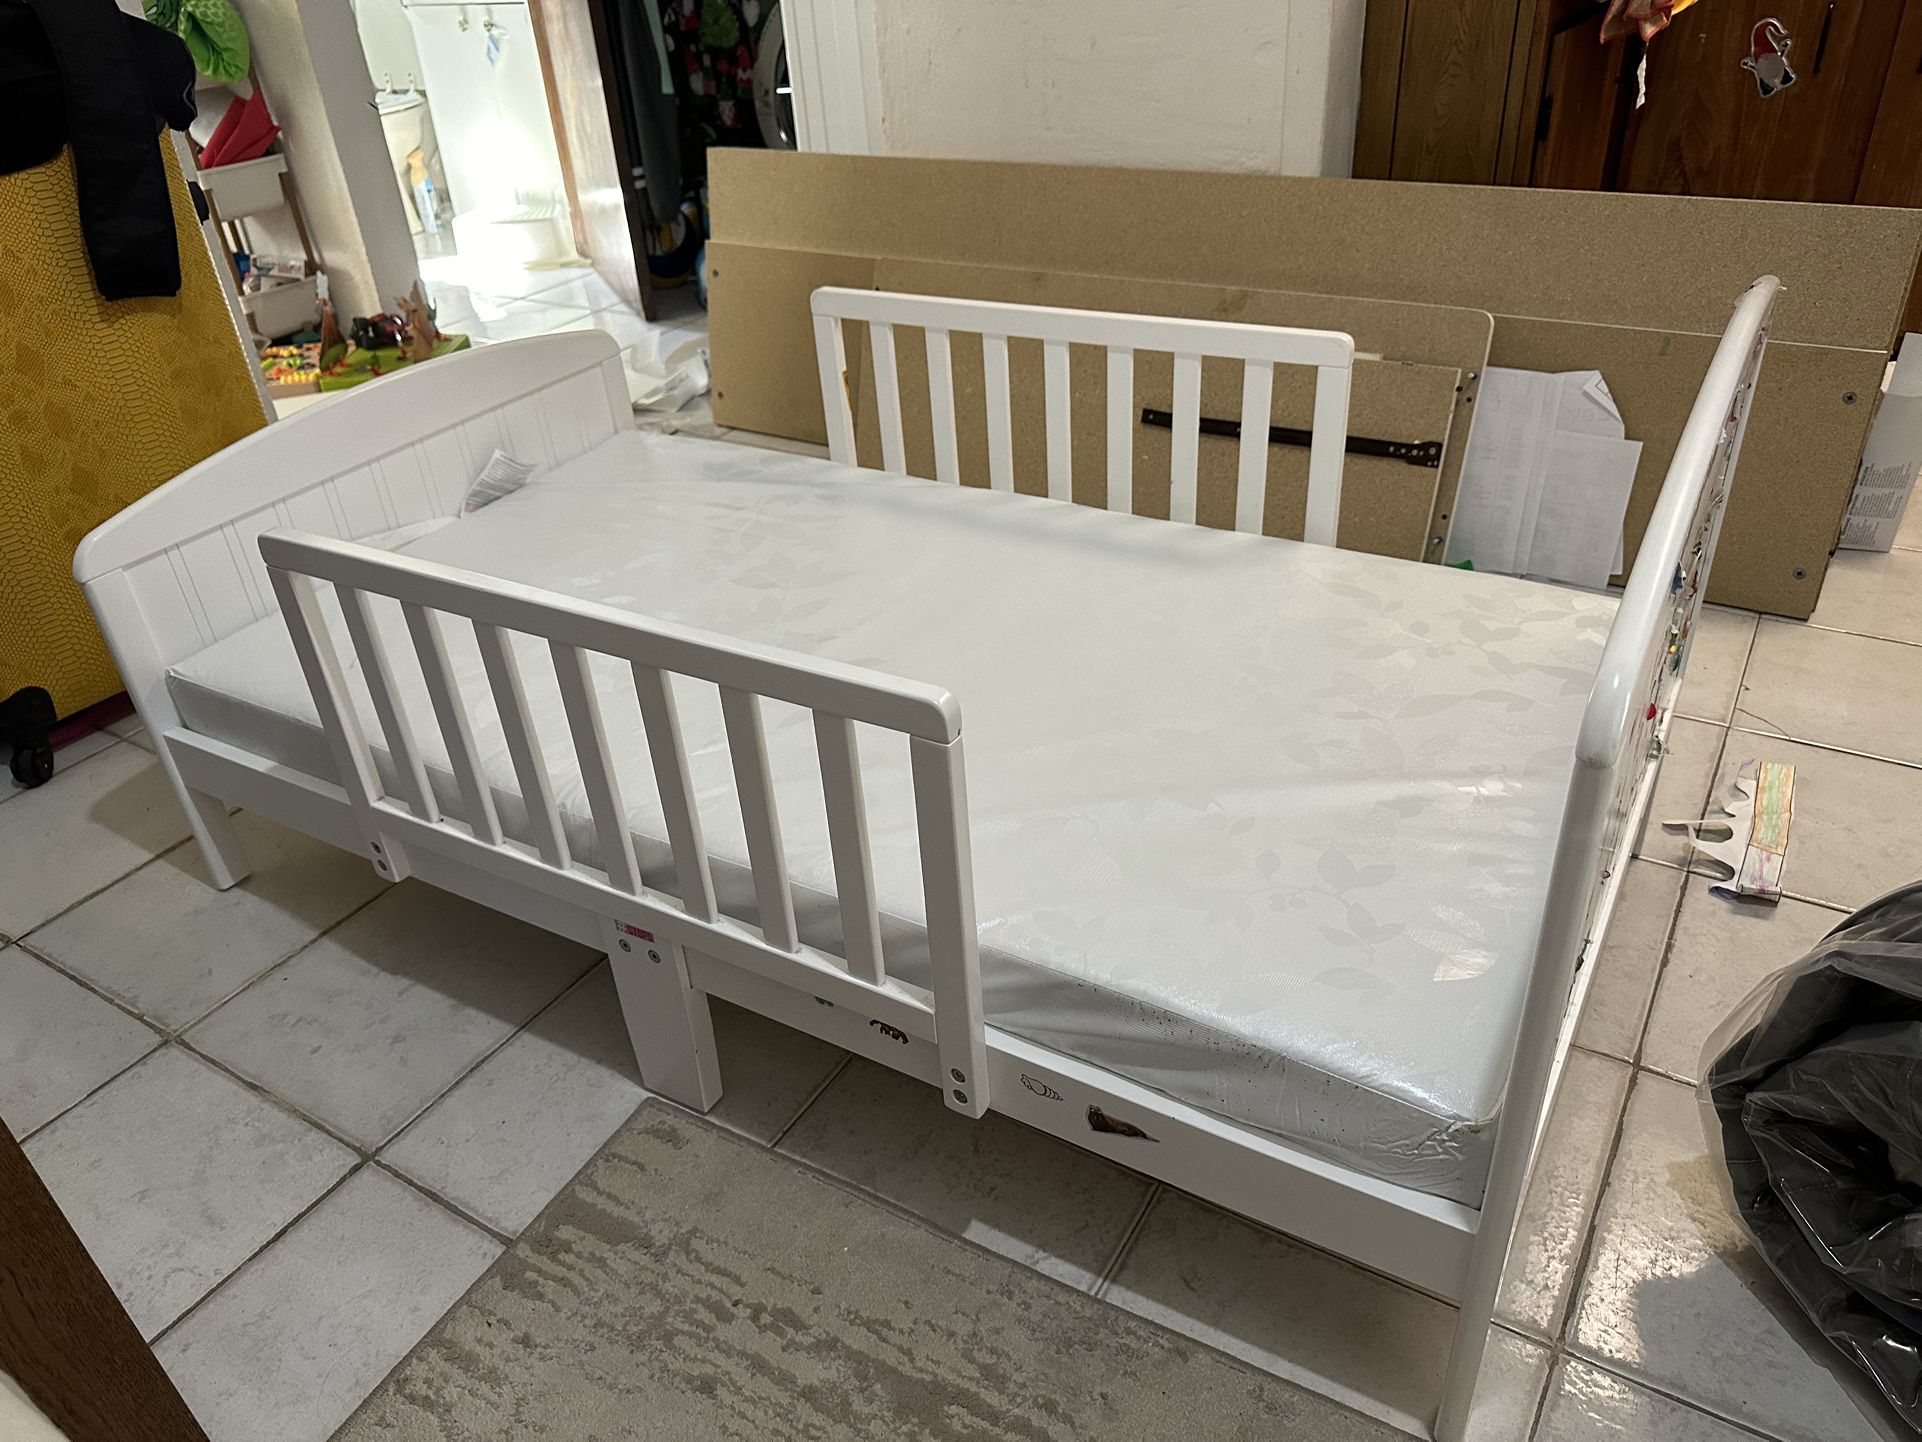 Bed For Toddler 